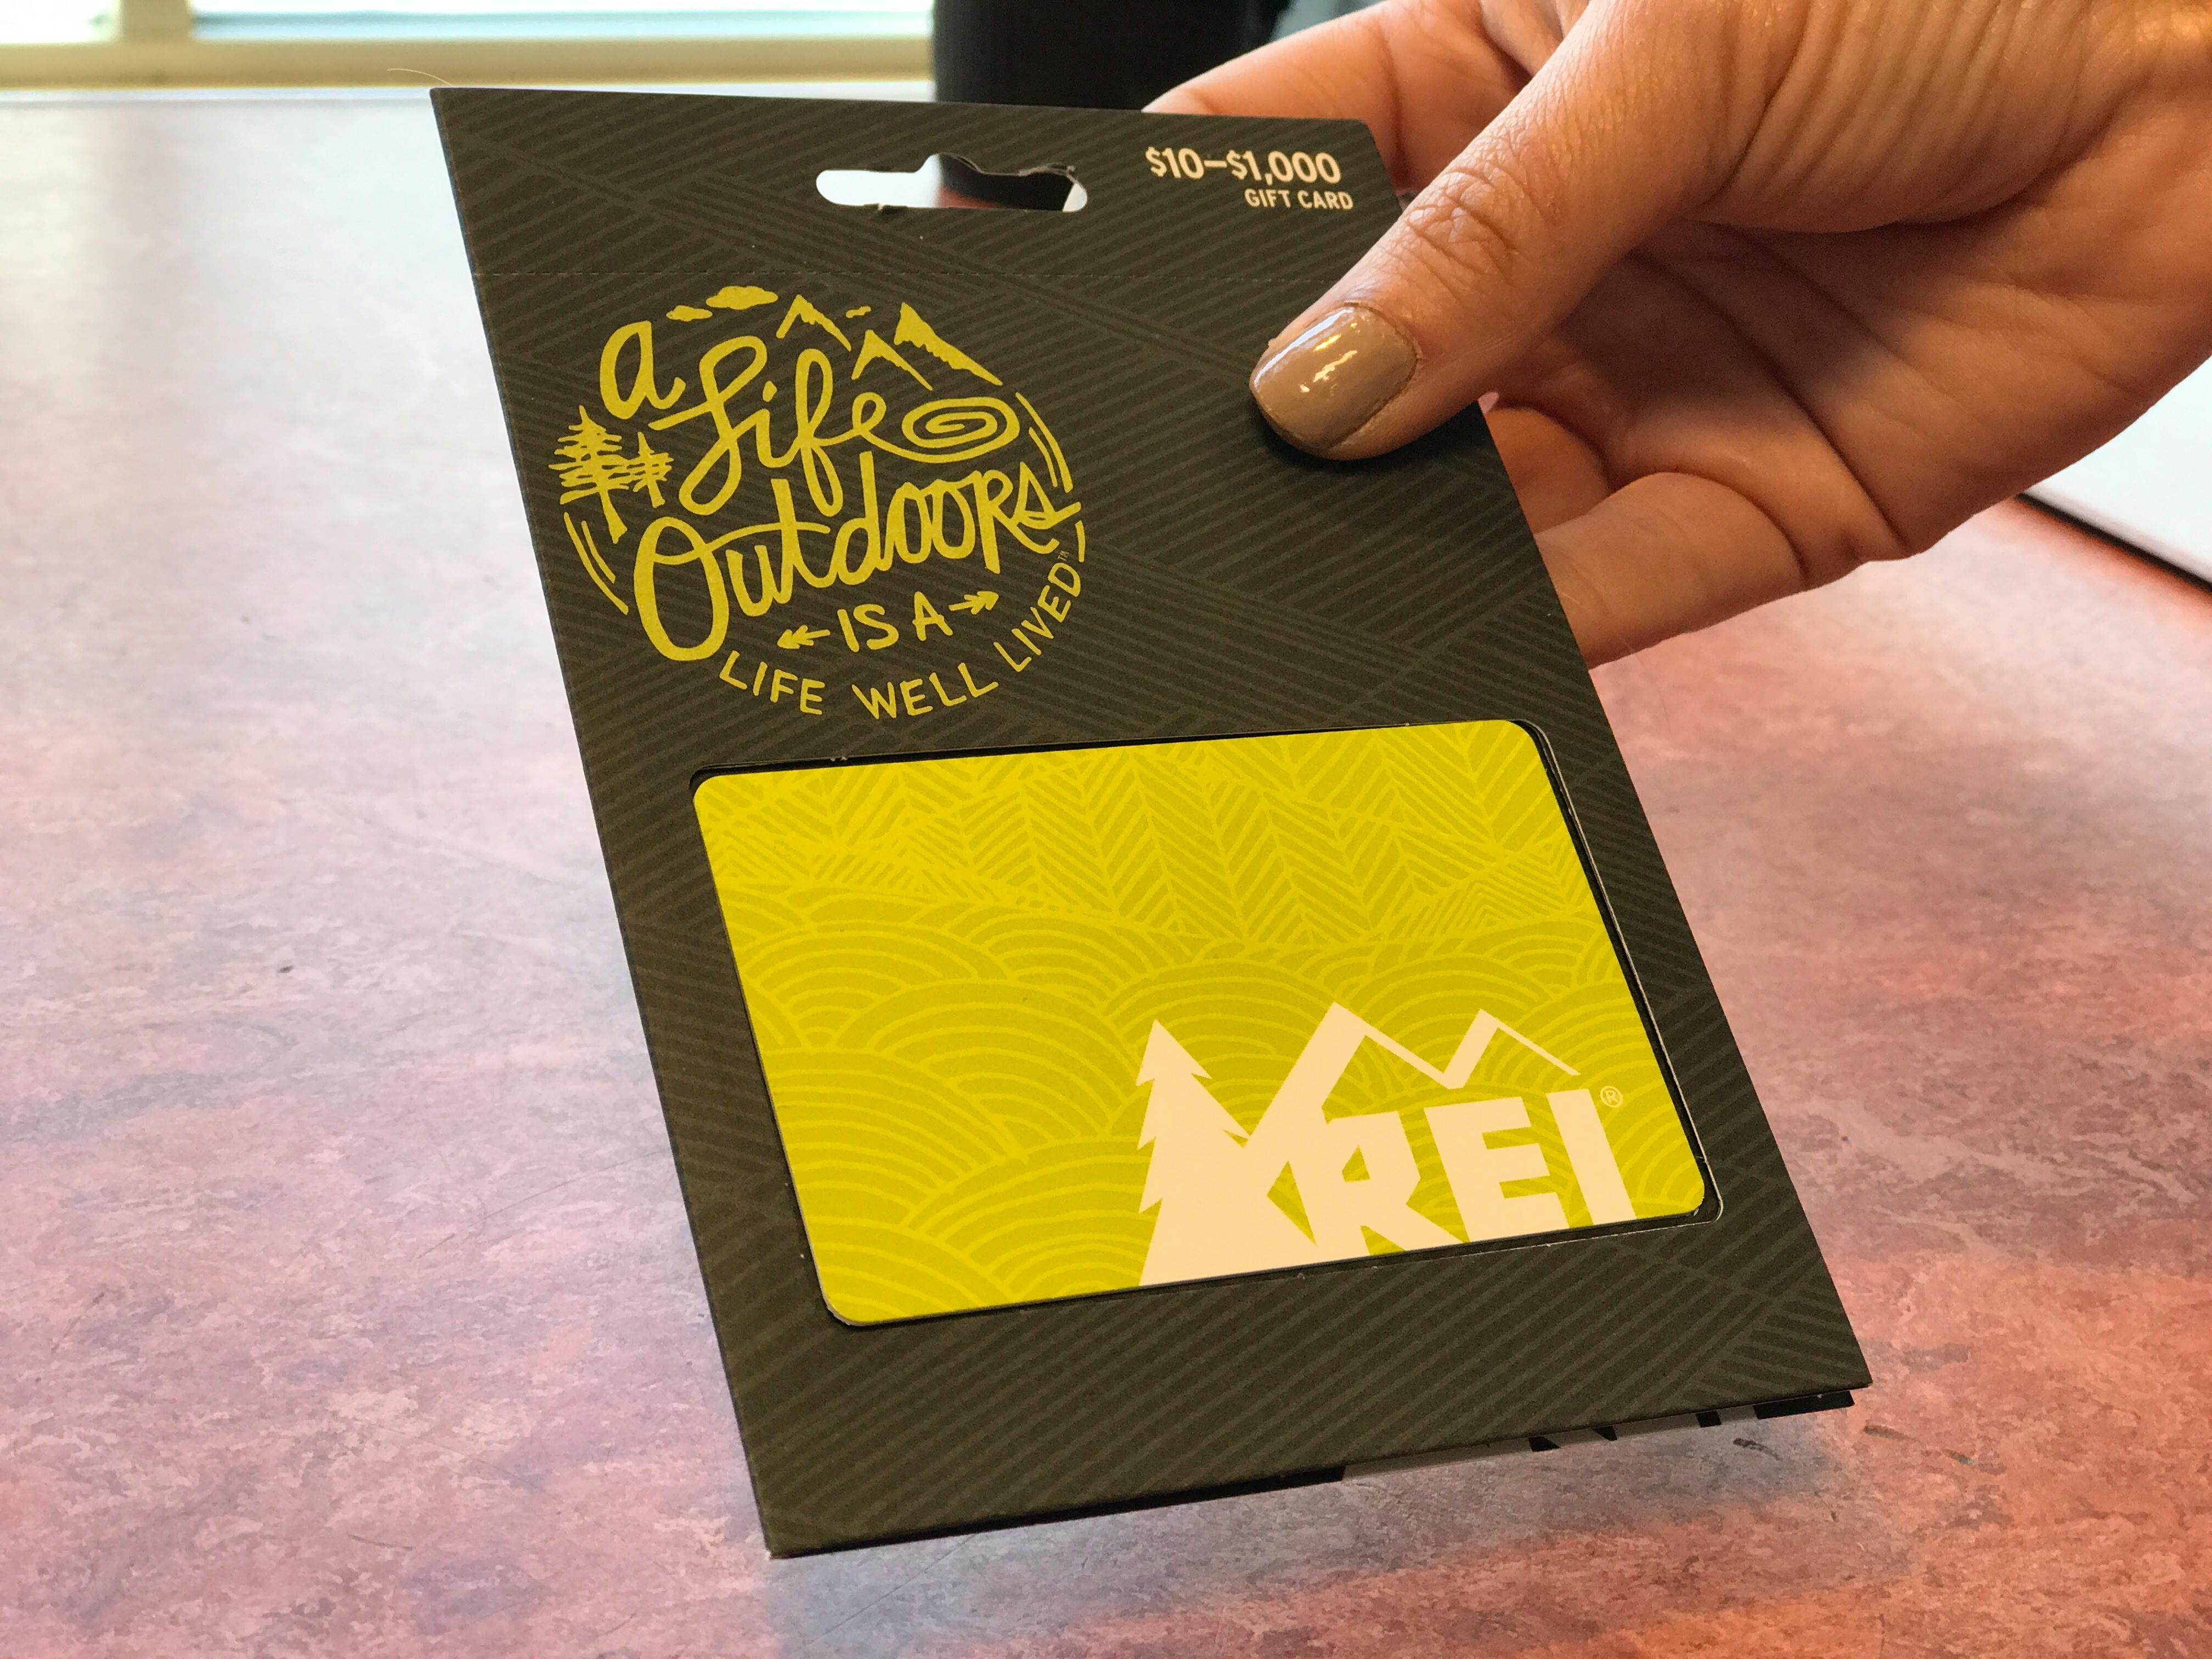 earn free gift cards - A person holding an REI gift card.